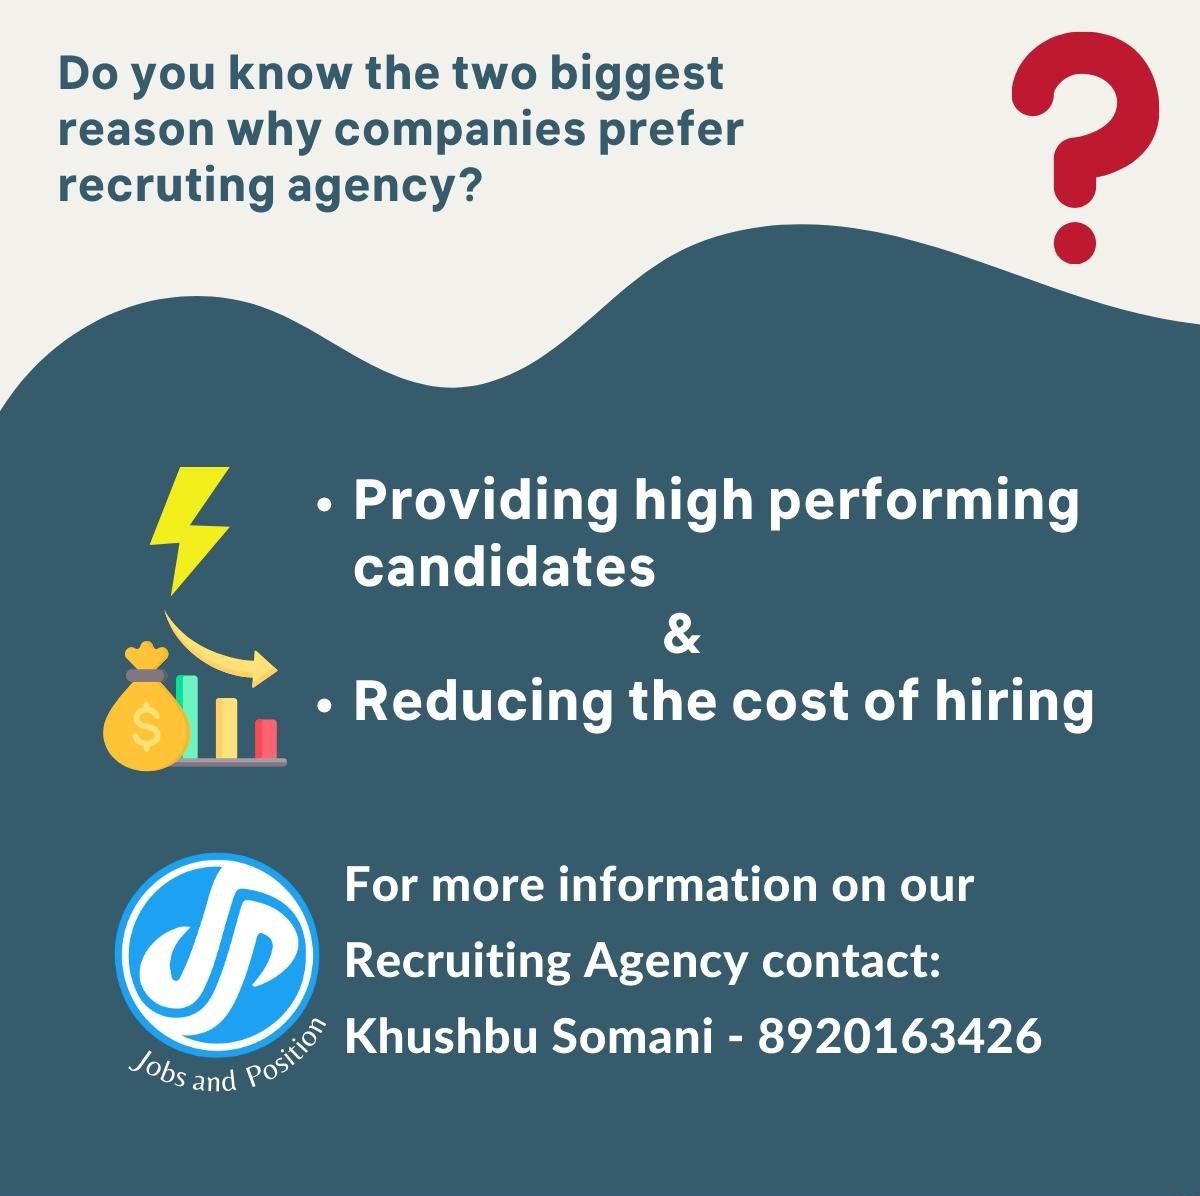 For more information on our Recruiting Agency contact:
Khushbu Somani- 8920163426
#opportunities #jobs #recruiter #recruitment2023 #recruitment
#recruitmentspecialists #recruitmentconsultants  #vacancy #recruiting #staffingservices #job #jobhiring #hiring #vacancy #staffingagency